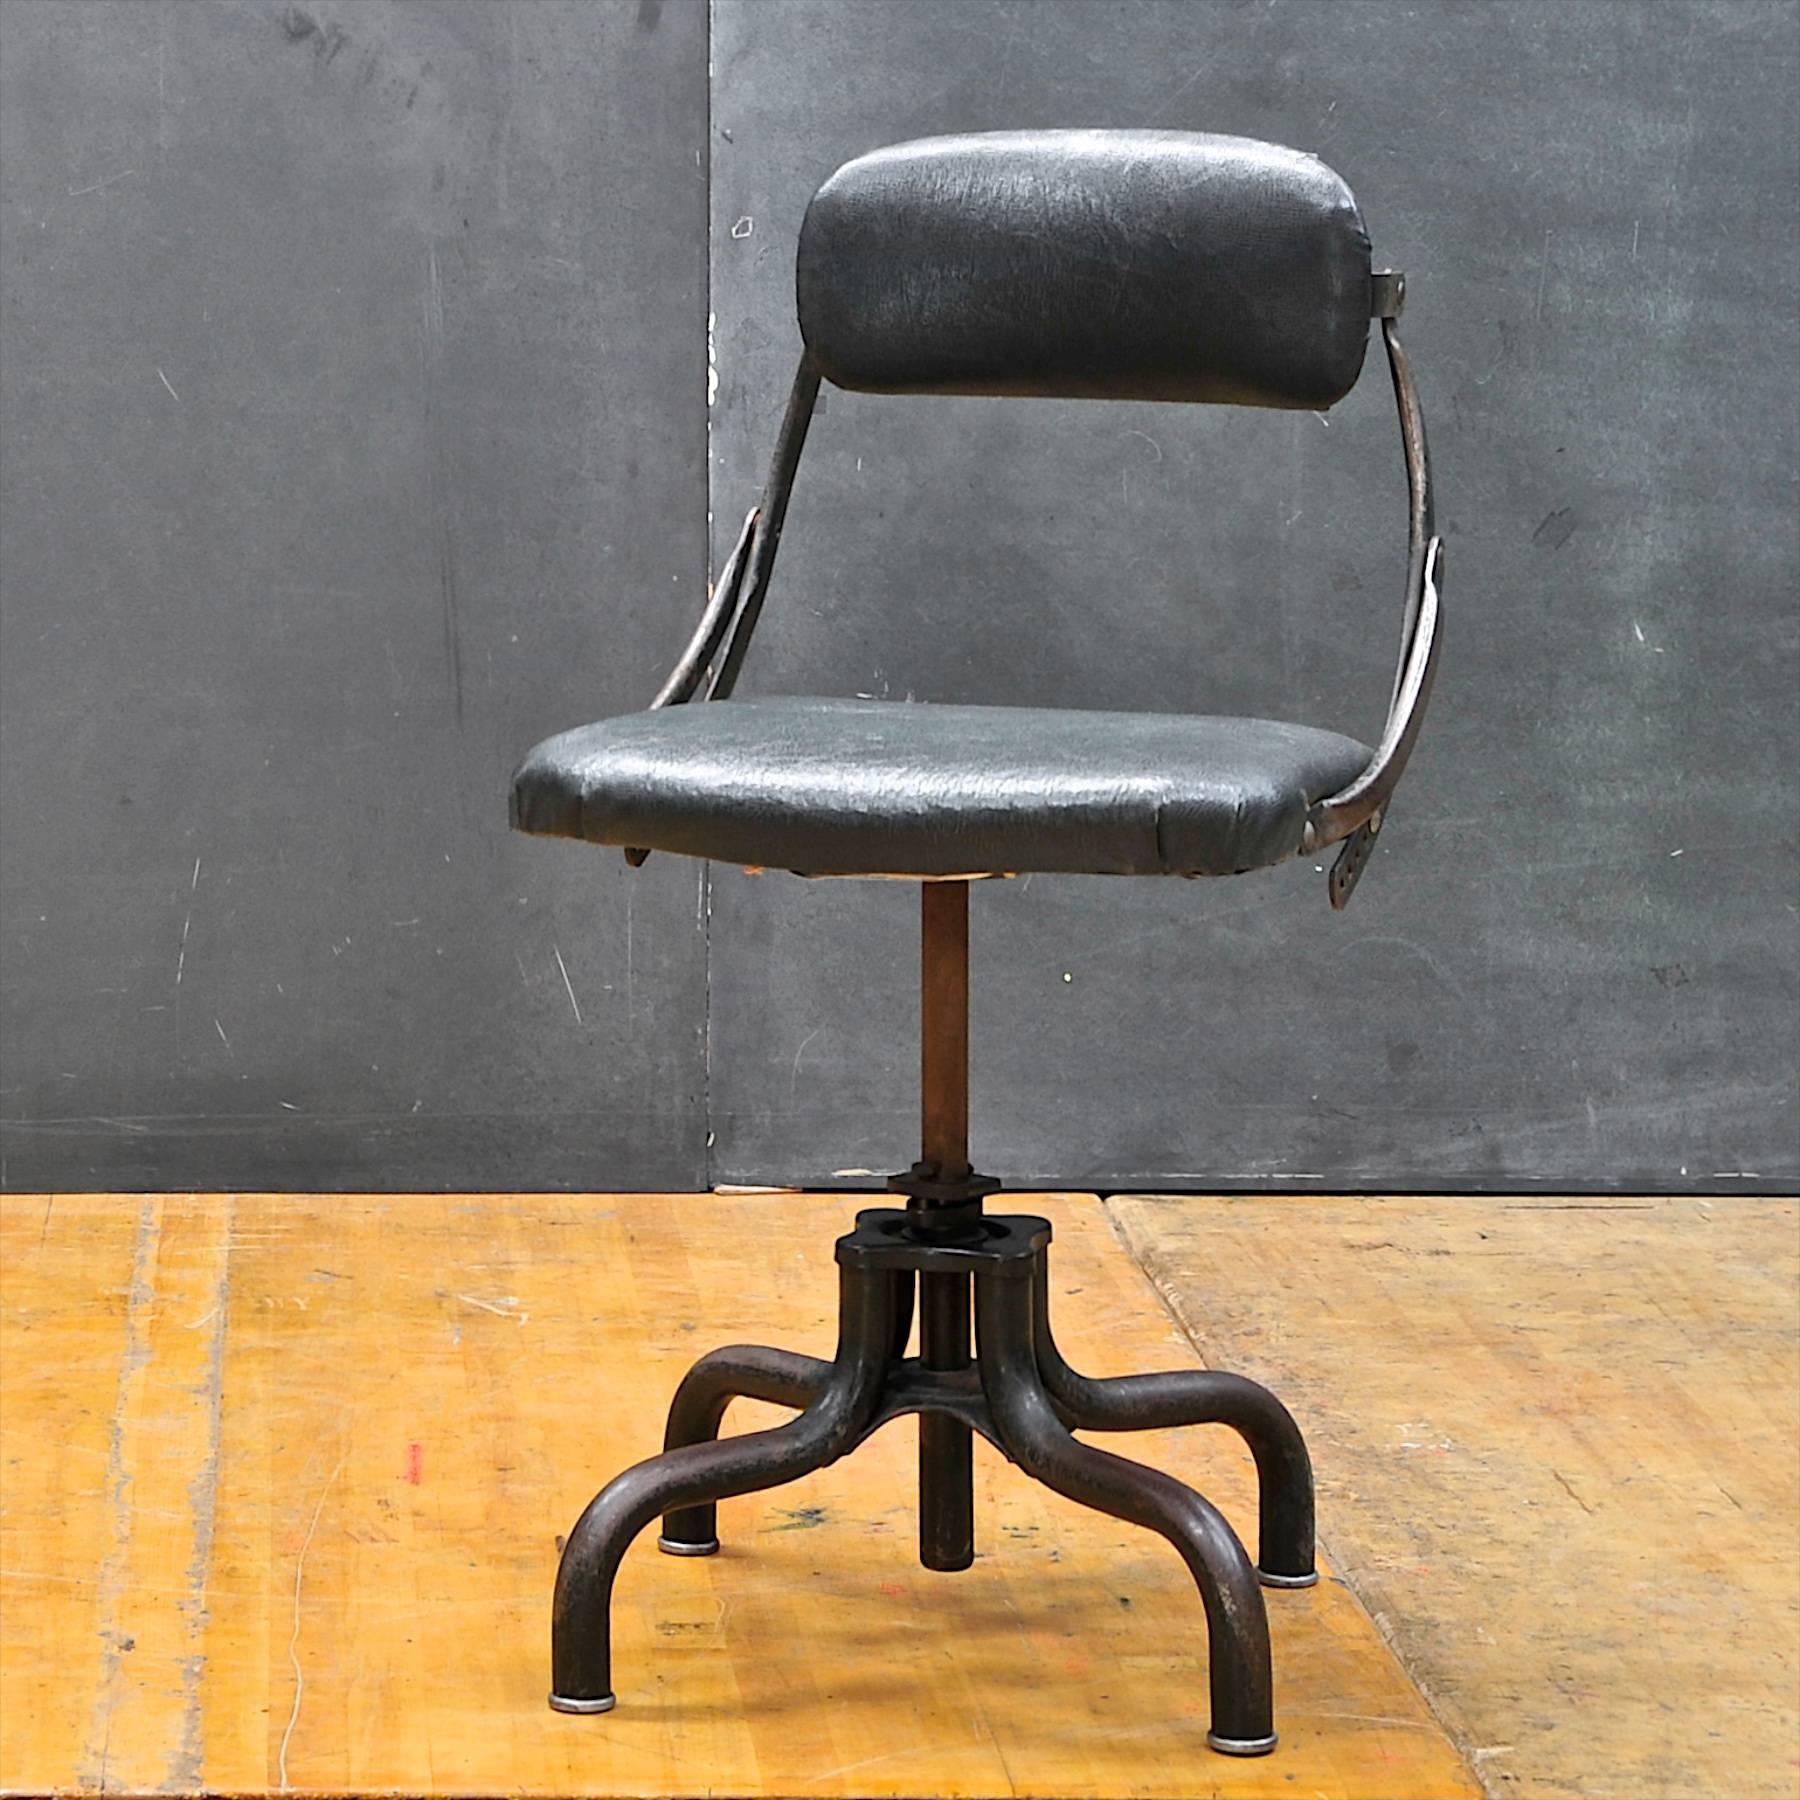 Nice original early century clerks chair. Very adjustable chair, wheels can be added. Seat height is set now at 19 1/2 inches. Presented in as-found unrestored condition.